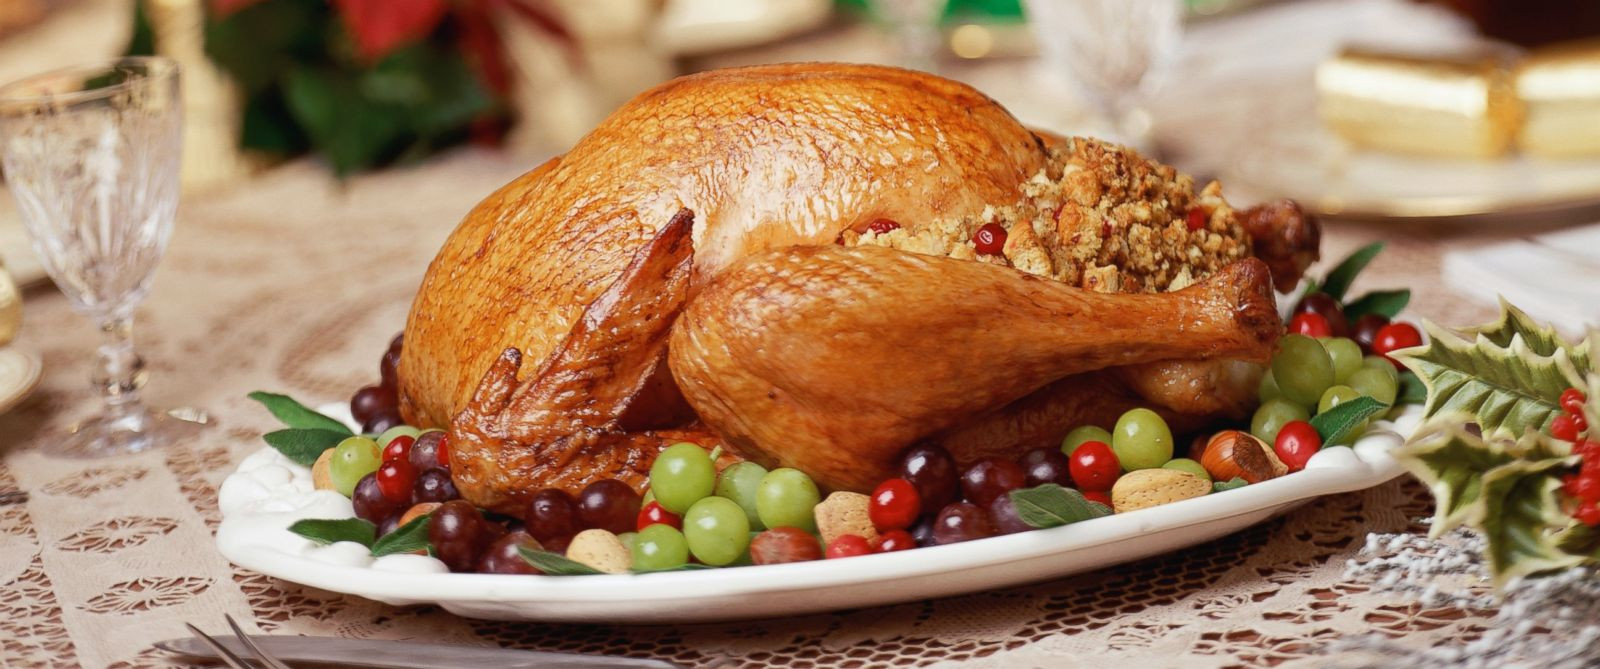 Thanksgiving Turkey Prices
 Turkey Prices Expected to Rise 15 to 20 Percent This